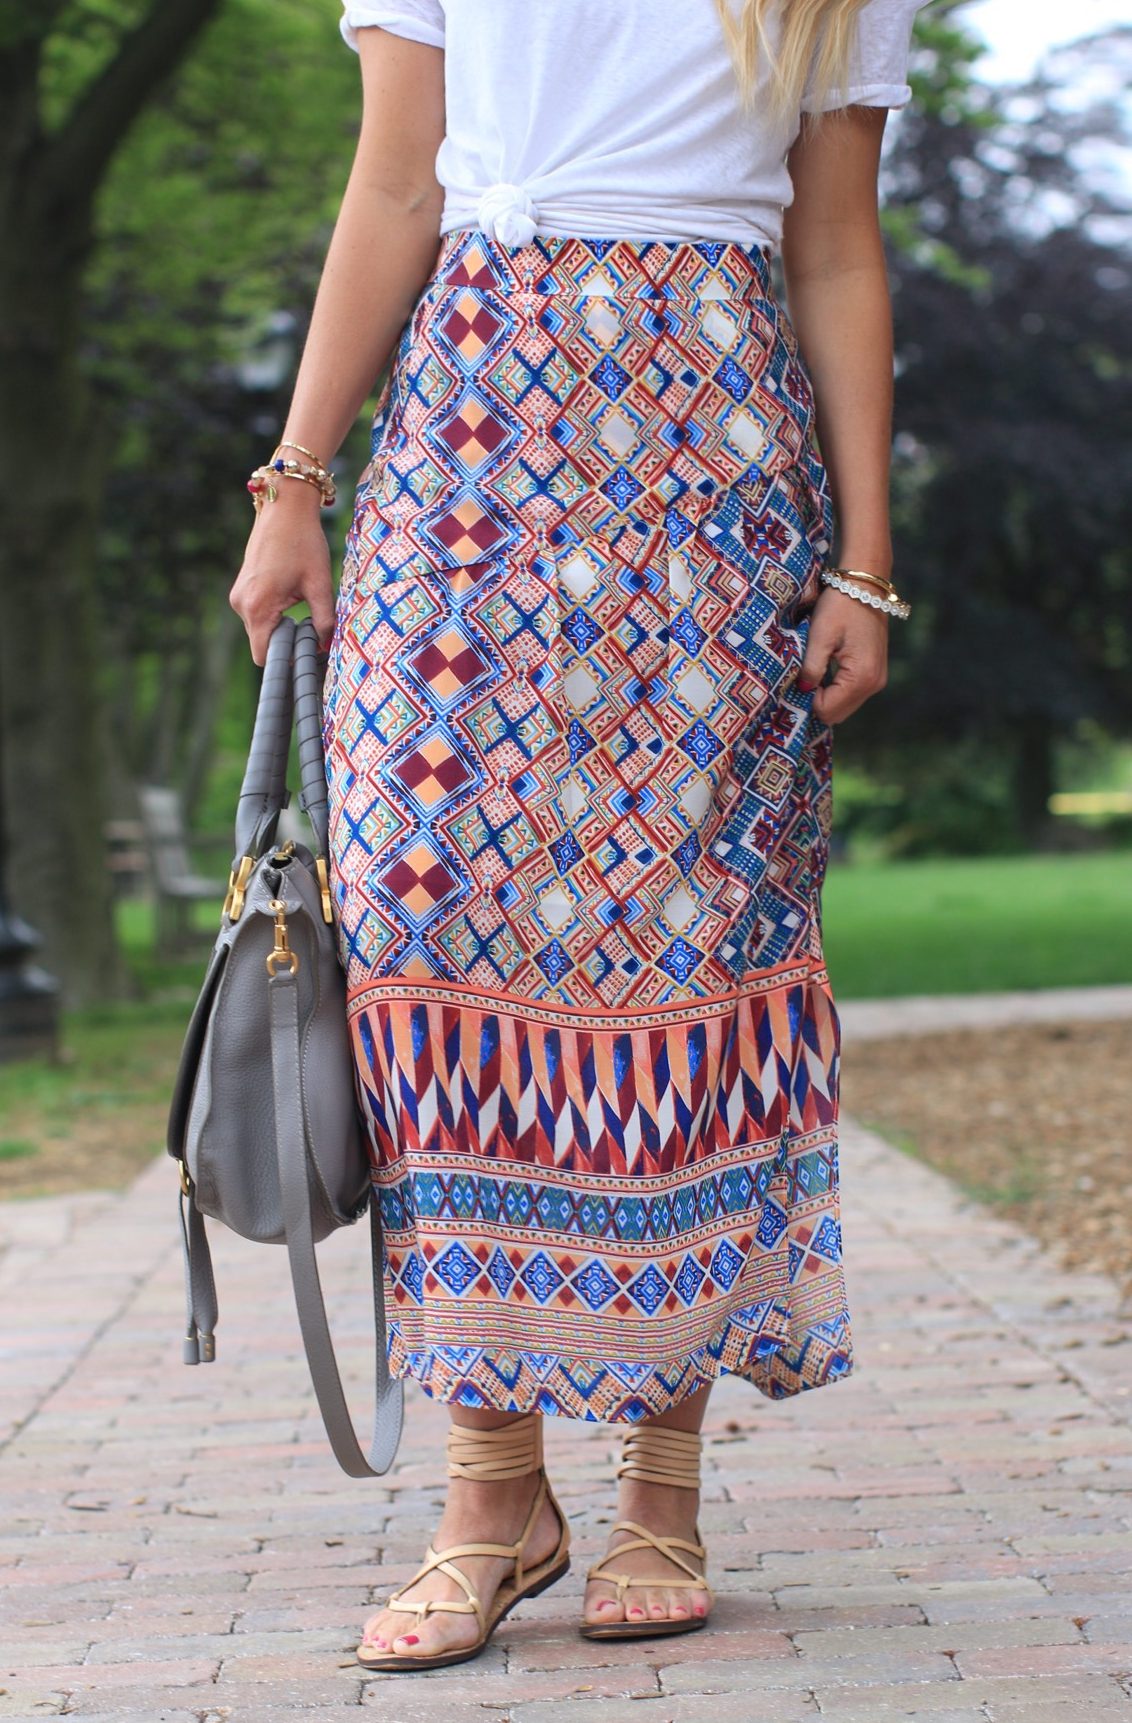 Jenna Crandall of Lunchpails and Lipstick in Anthropologie wrap skirt and Chloe handbag